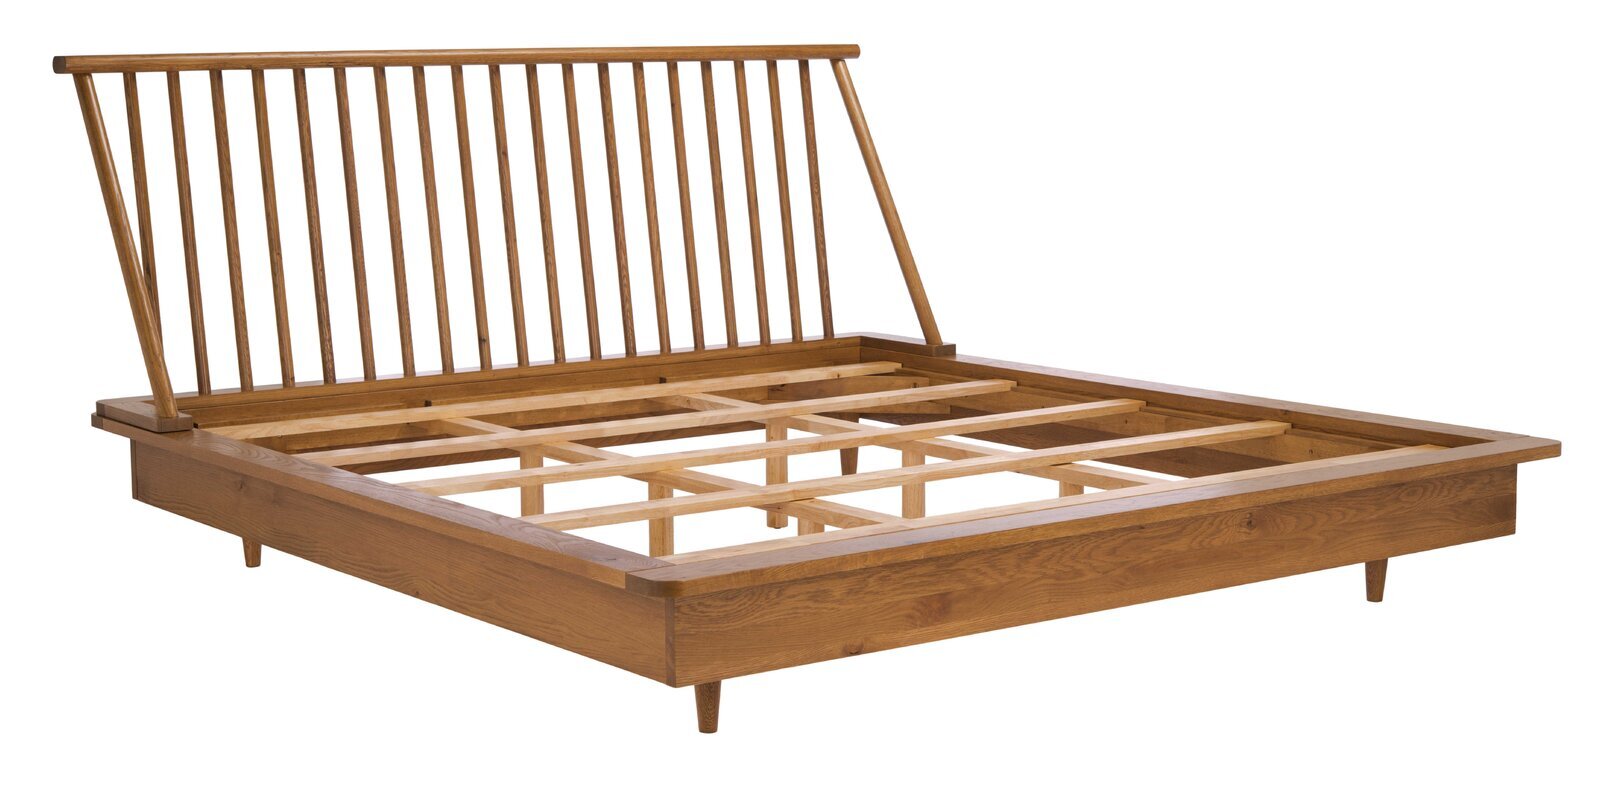 Low profile king bed in a mid century modern style